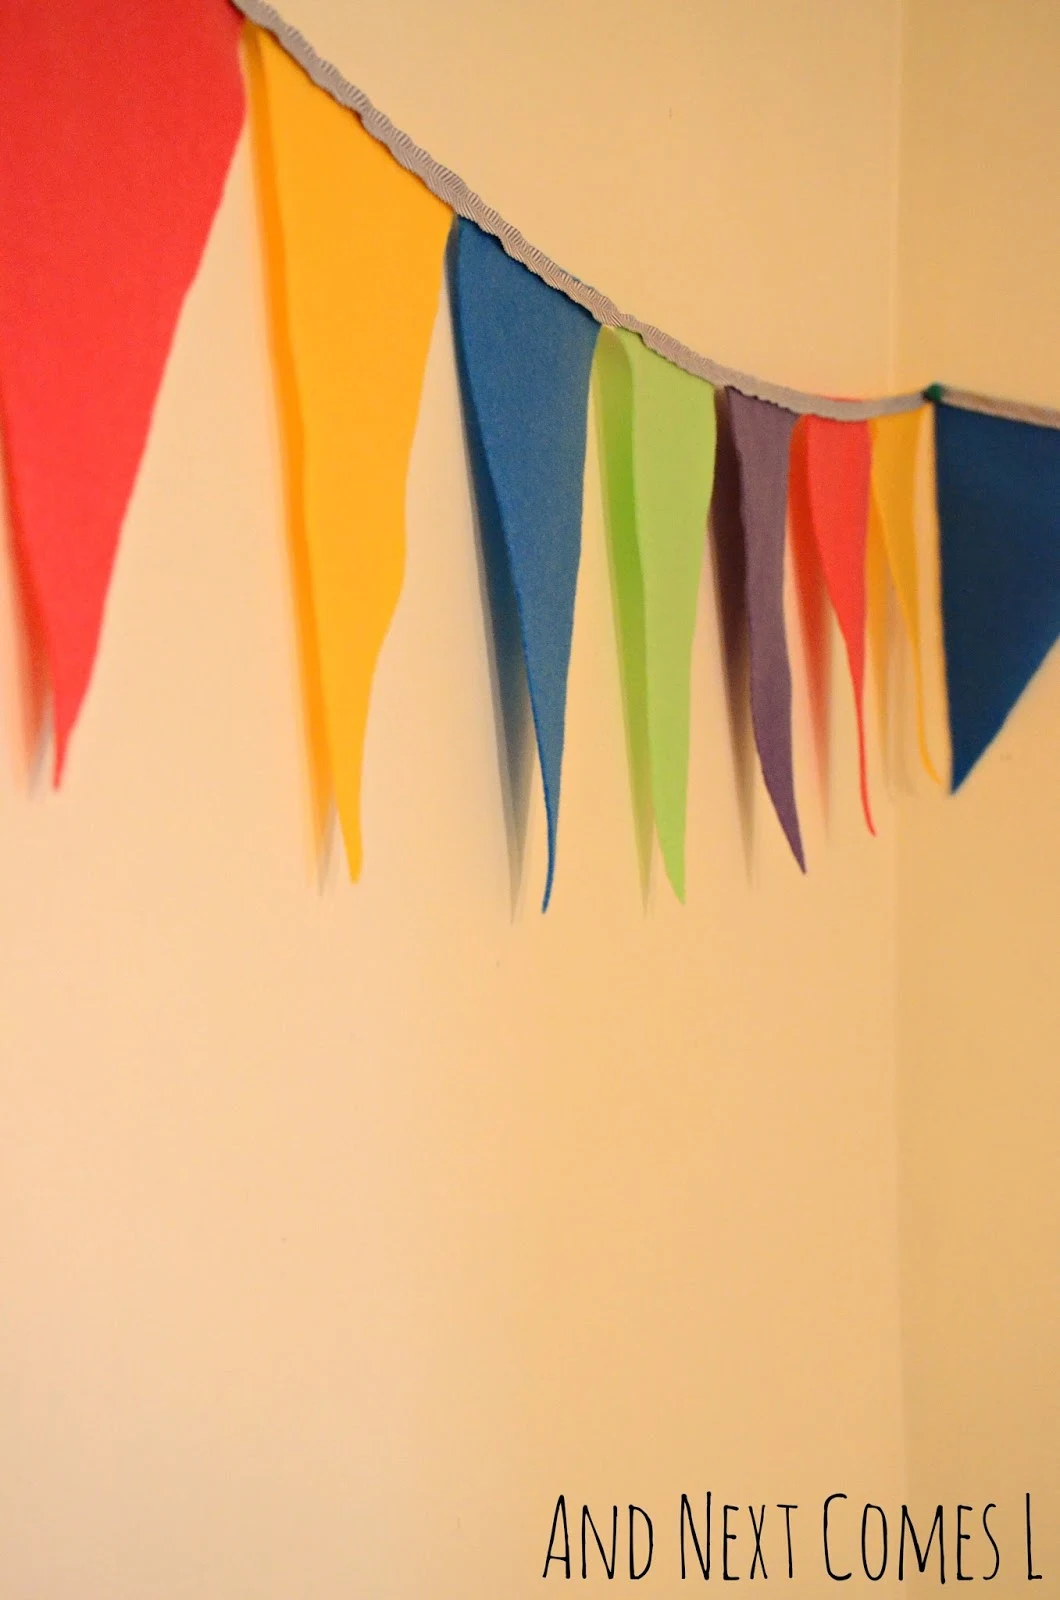 Easy DIY felt bunting with free printable template from And Next Comes L